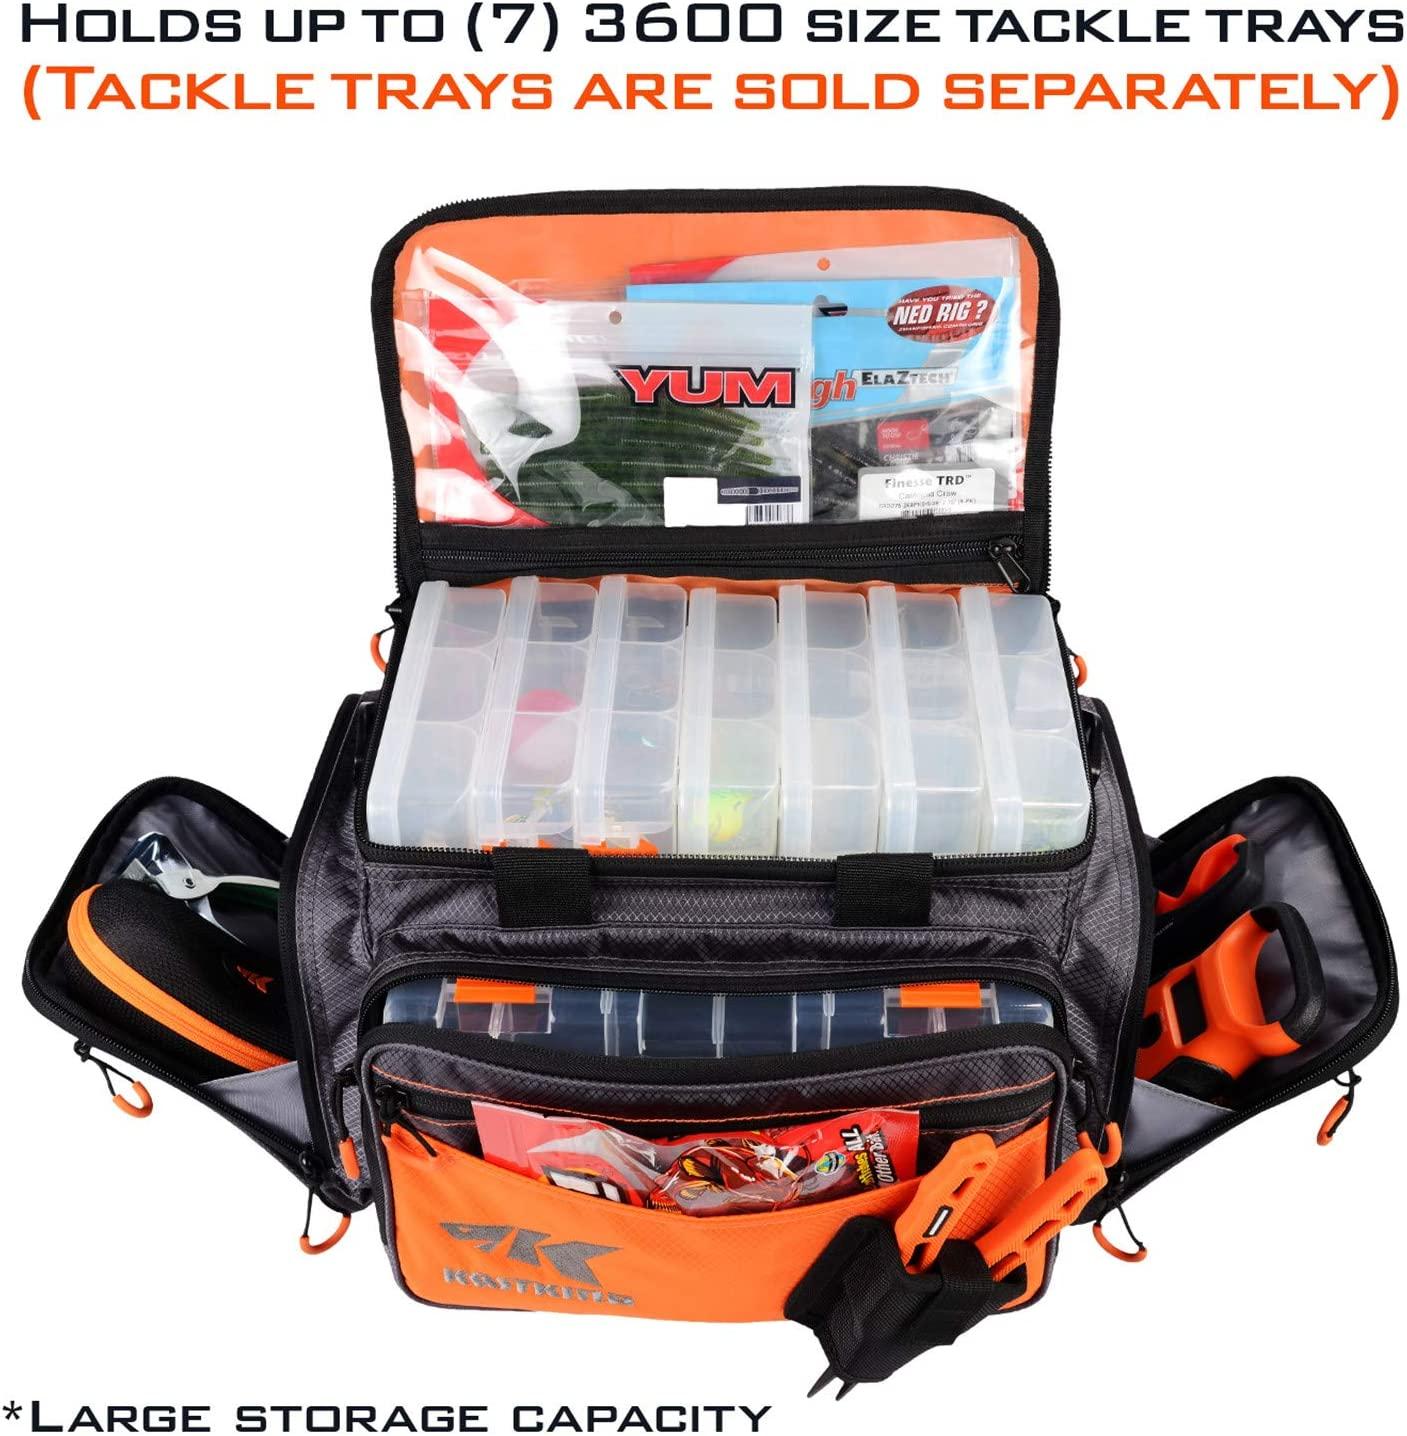 Fishing Tackle Bags - Large Saltwater Resistant Fishing Bags